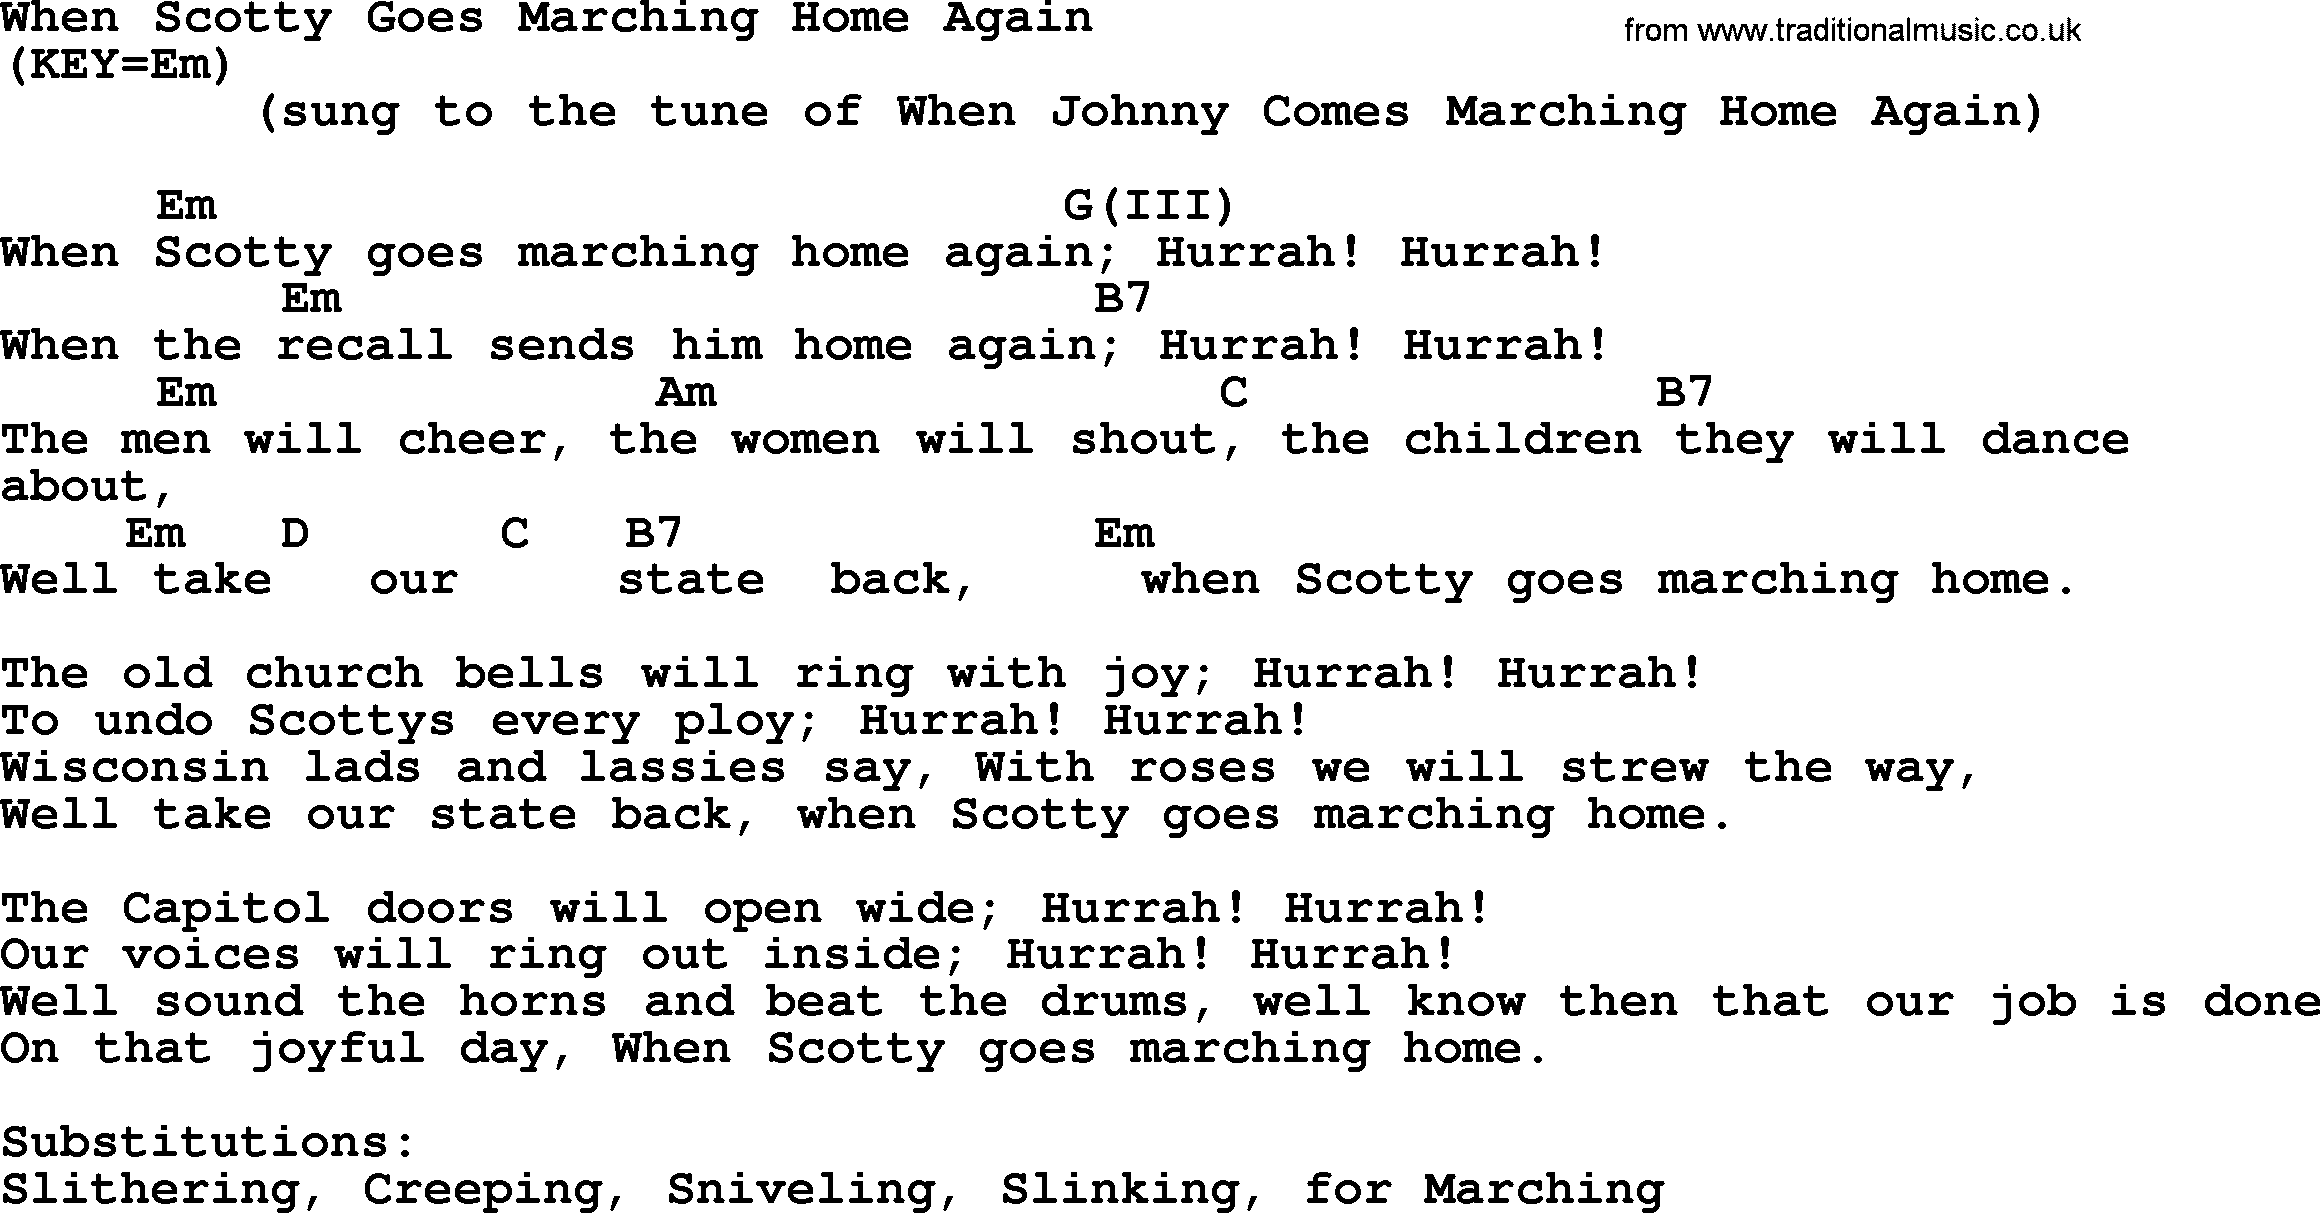 Political, Solidarity, Workers or Union song: When Scotty Goes Marching Home Again, lyrics and chords